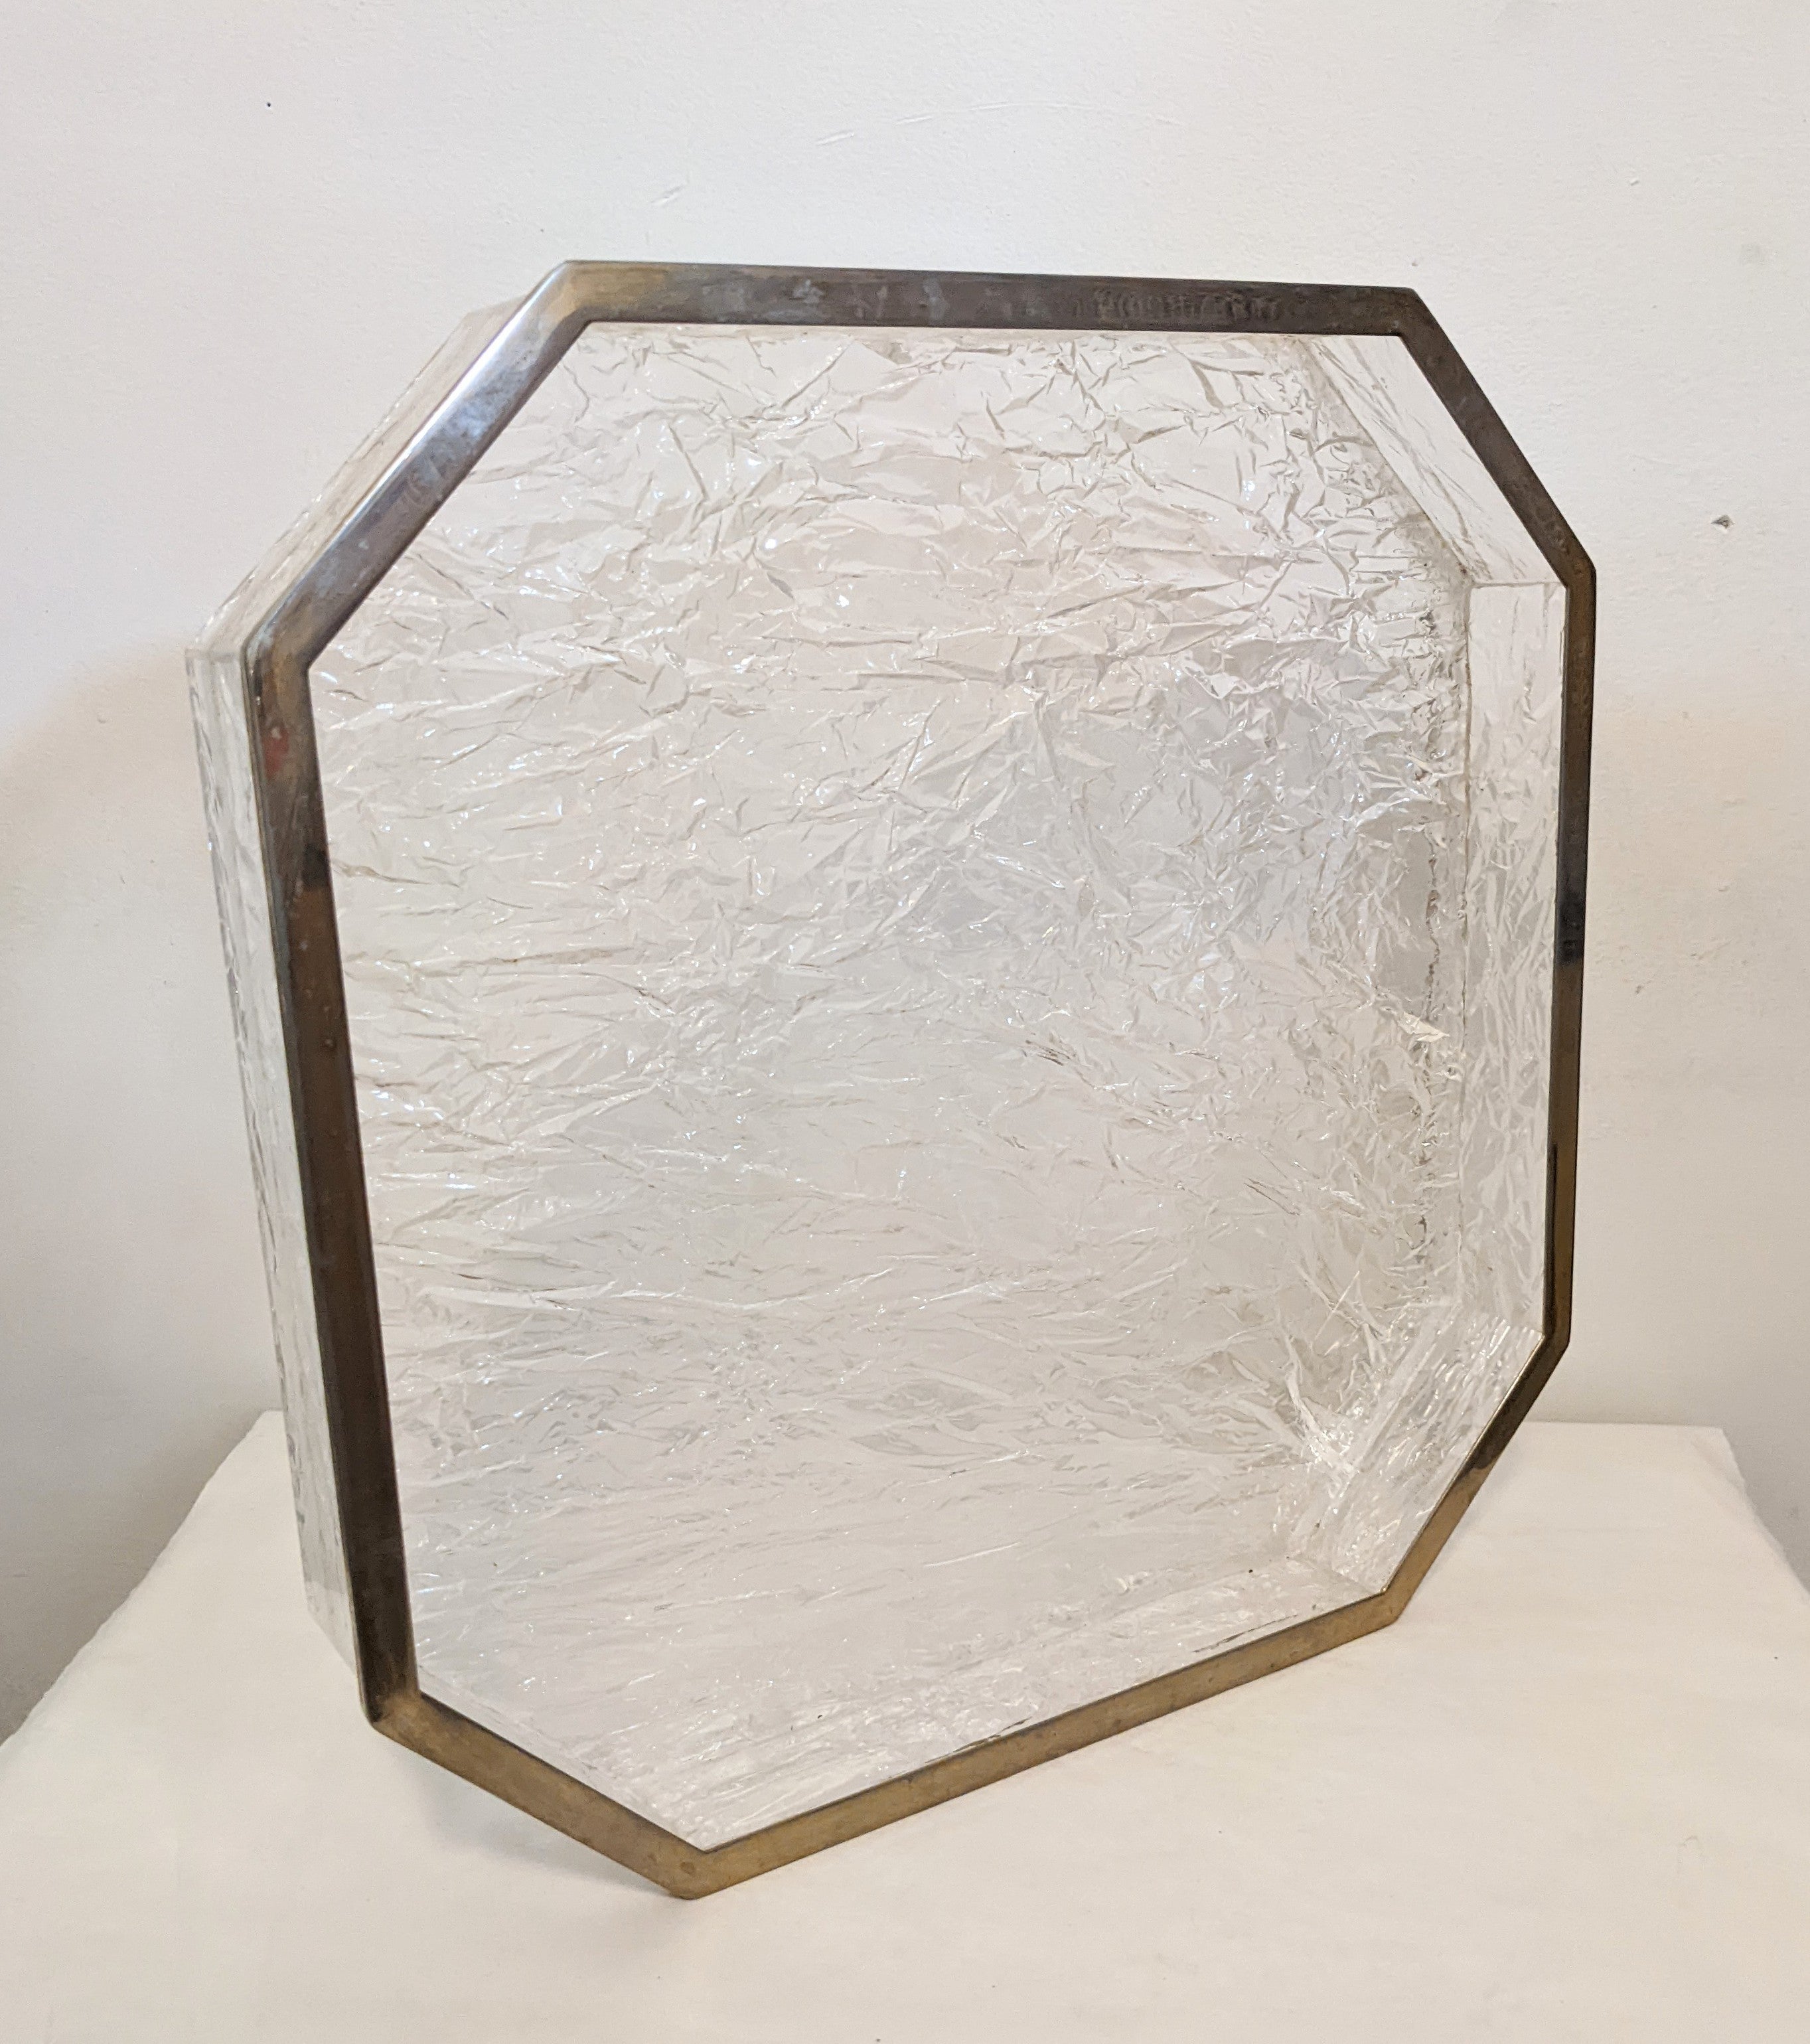 Crackle finish lucite serving tray from the 1970's with silverplated rim in the style of Willy Rizzo. Cut square corners give an interesting shape. The chipped lucite surface is placed below the tray to give an ice-y finish above, perfect for bar